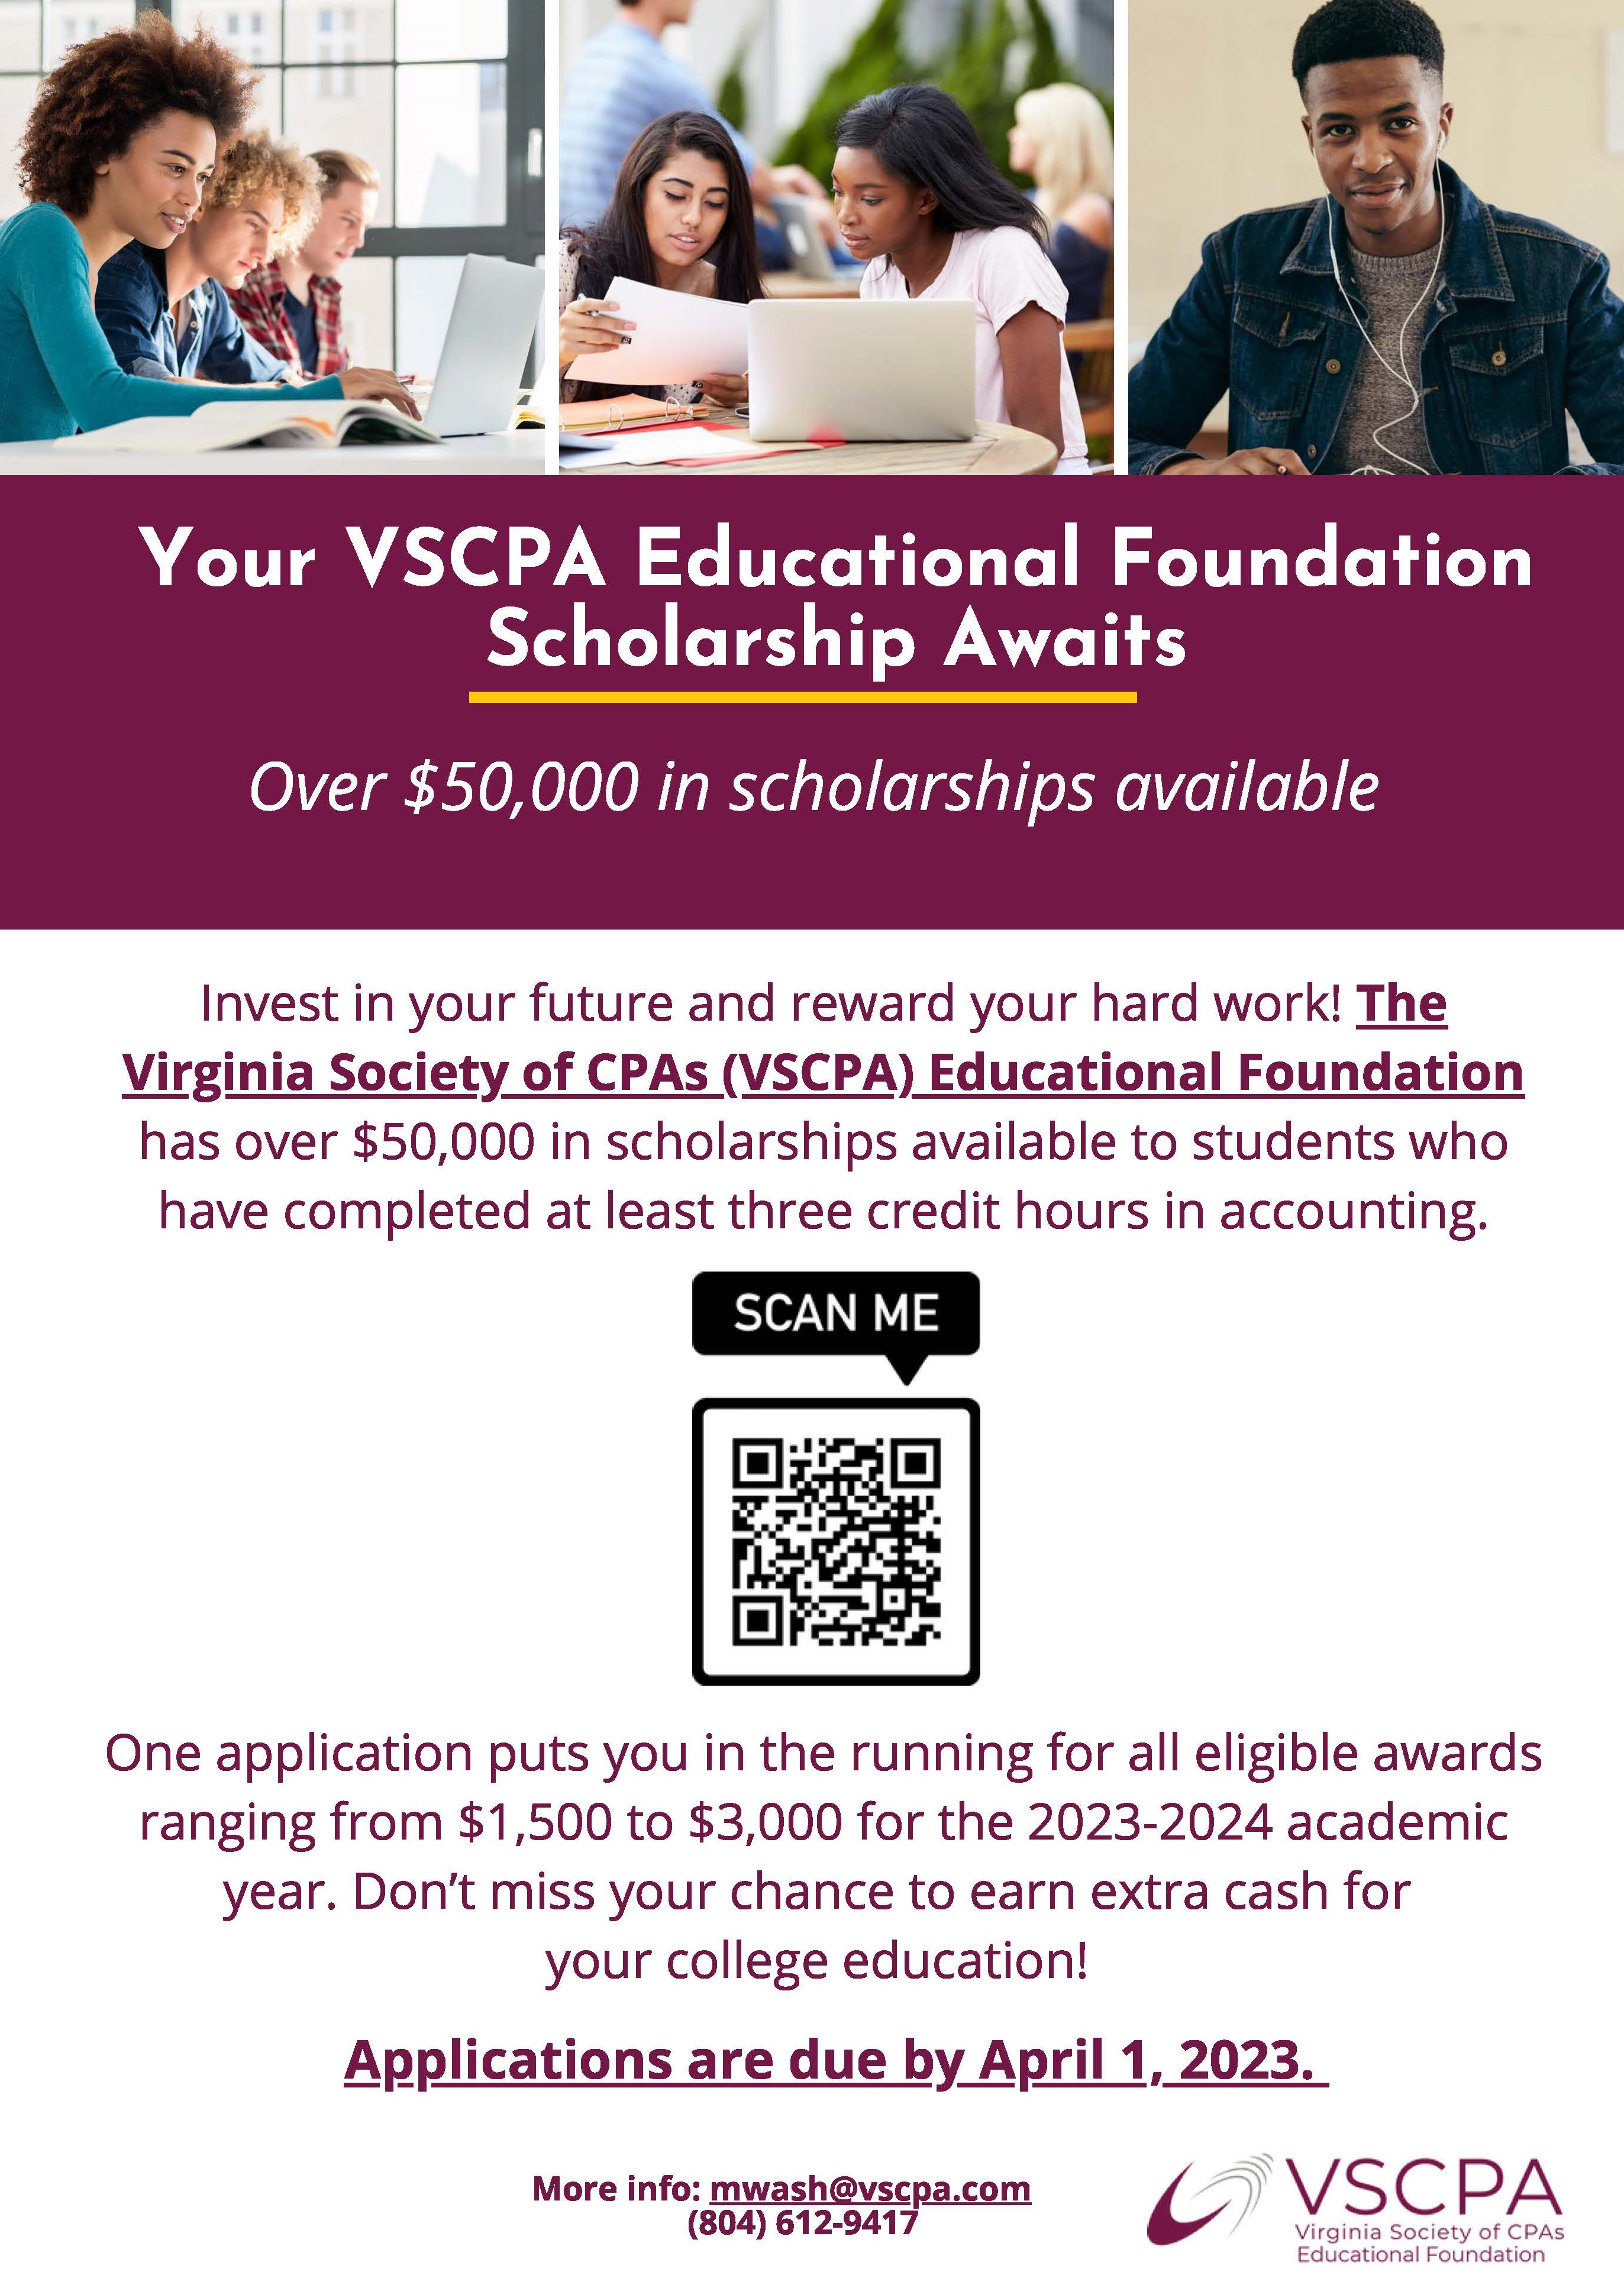 Invest in your future and reward your hard work! The Virginia Society of CPAs (VSCPA) Educational Foundation has over $50,000 in scholarships available to students who have completed at least three credit hours in accounting.  One application puts you in the running for all eligible awards ranging from $1,500 to $3,000 for the 2023-2024 academic year. Don't miss your chance to earn extra cash for your college education! Applications are due by April 1 2023.  For more information, visit the VSCPA Educational Foundation Scholarships website (https://www.vscpa.com/scholarships-available)